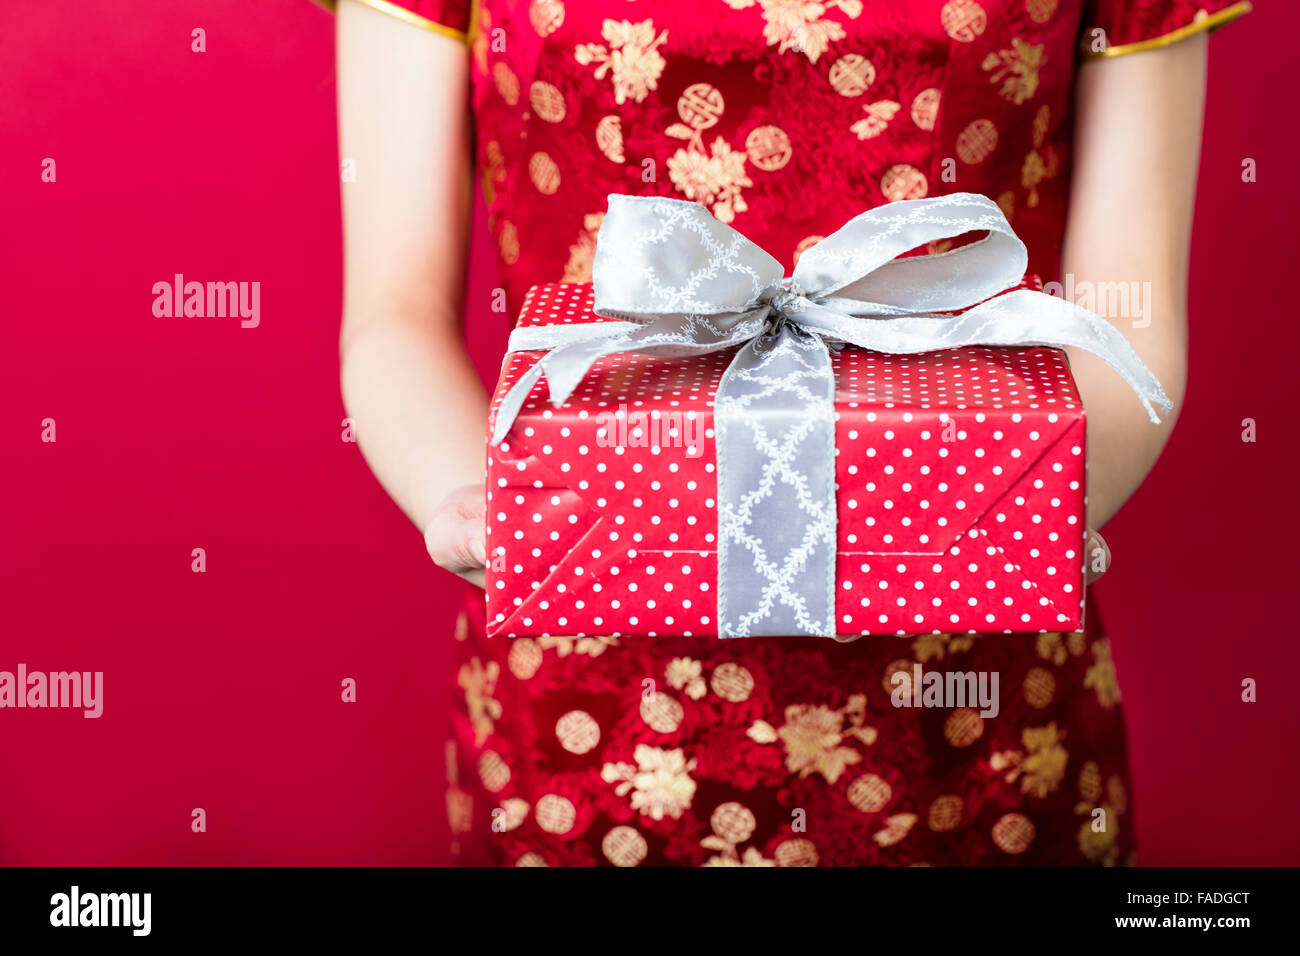 young woman holding gift box on red background Stock Photo